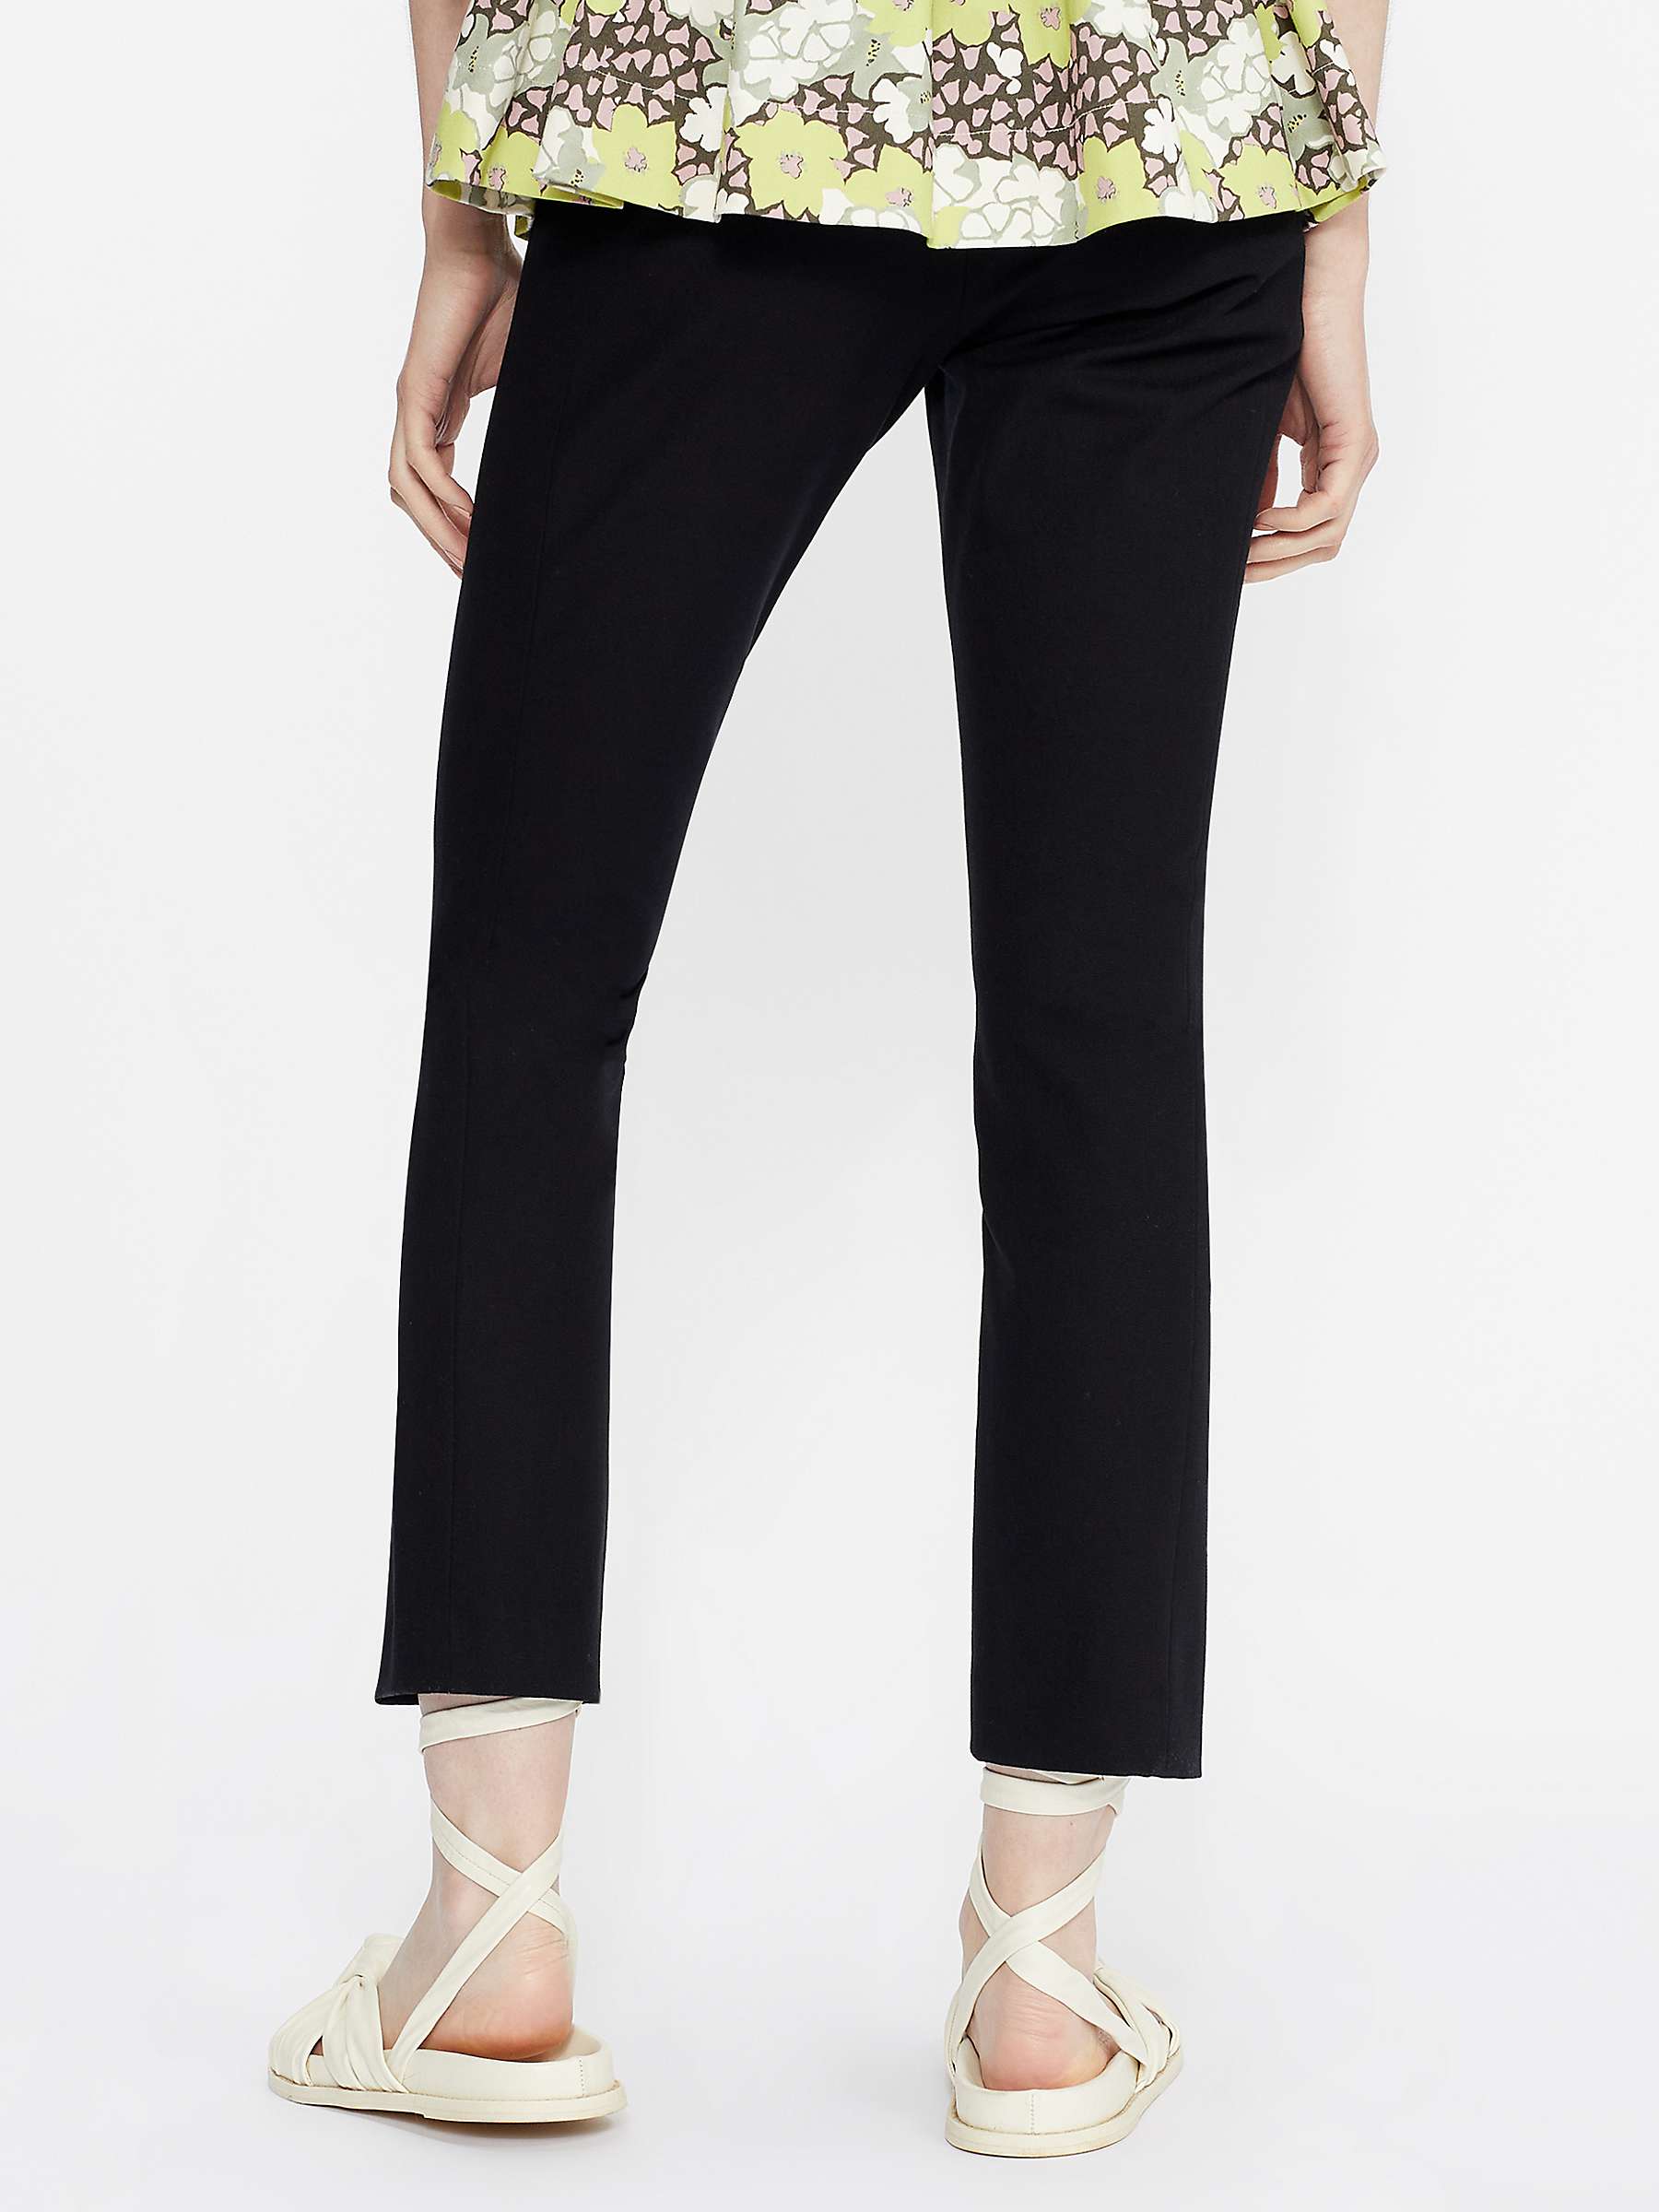 Buy Ted Baker Ozete Ankle Grazer Trousers, Black Online at johnlewis.com